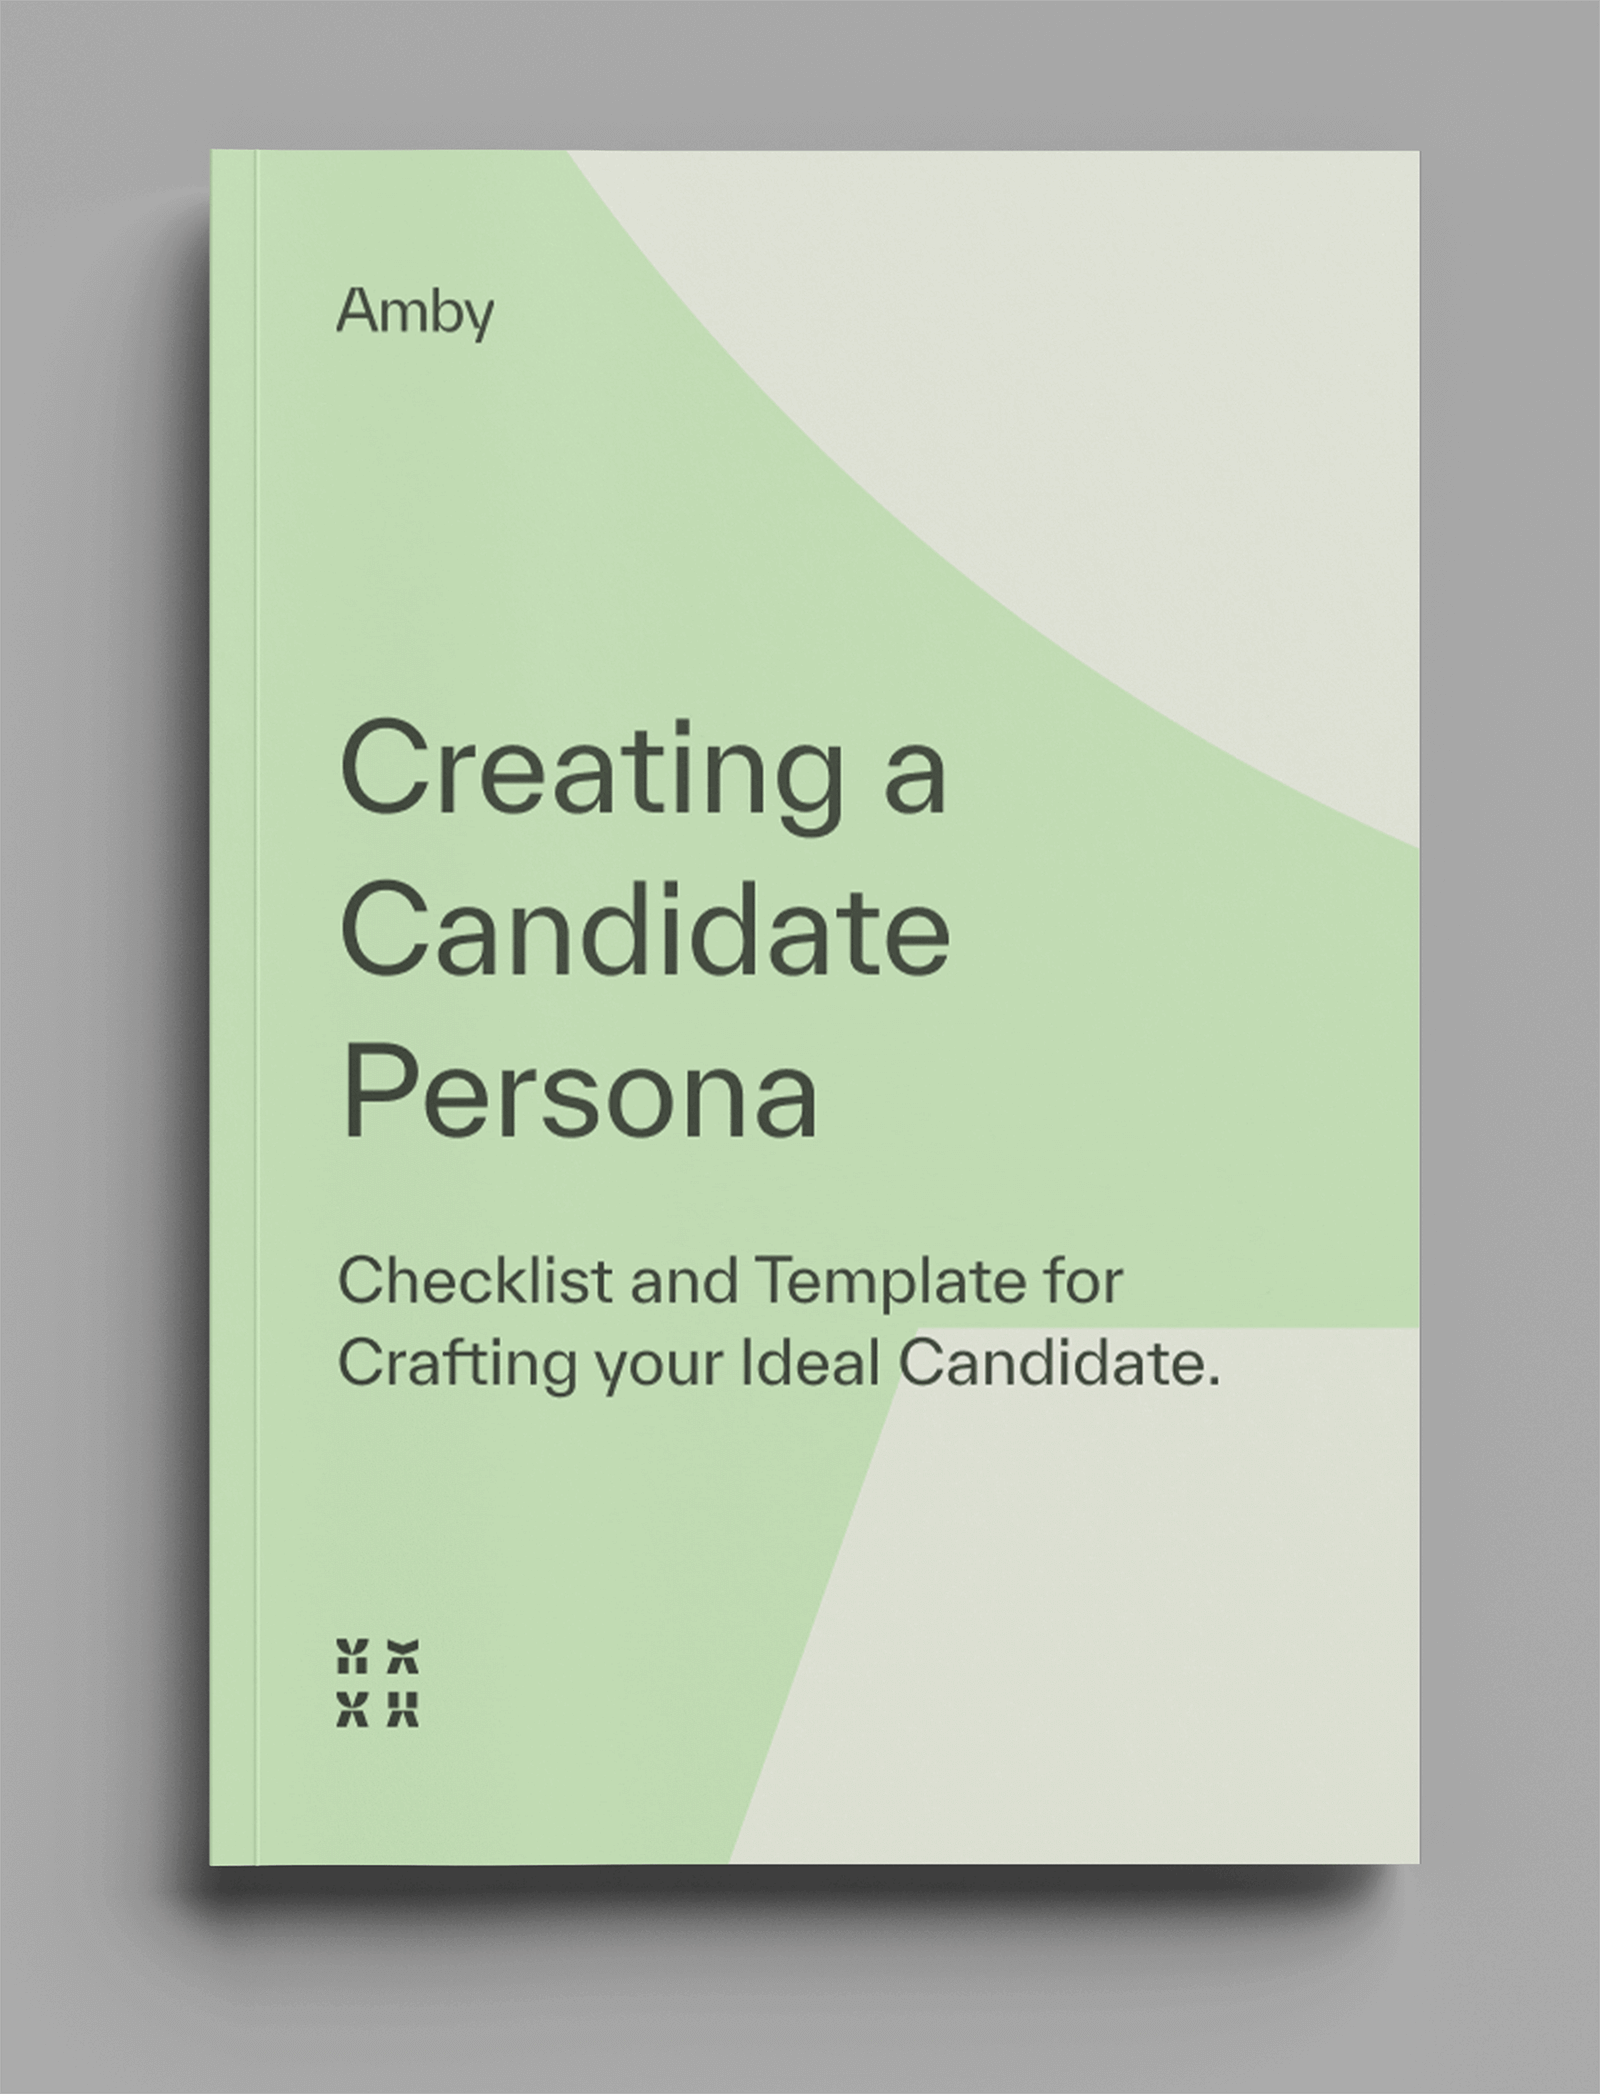 Creating a candidate persona mockup